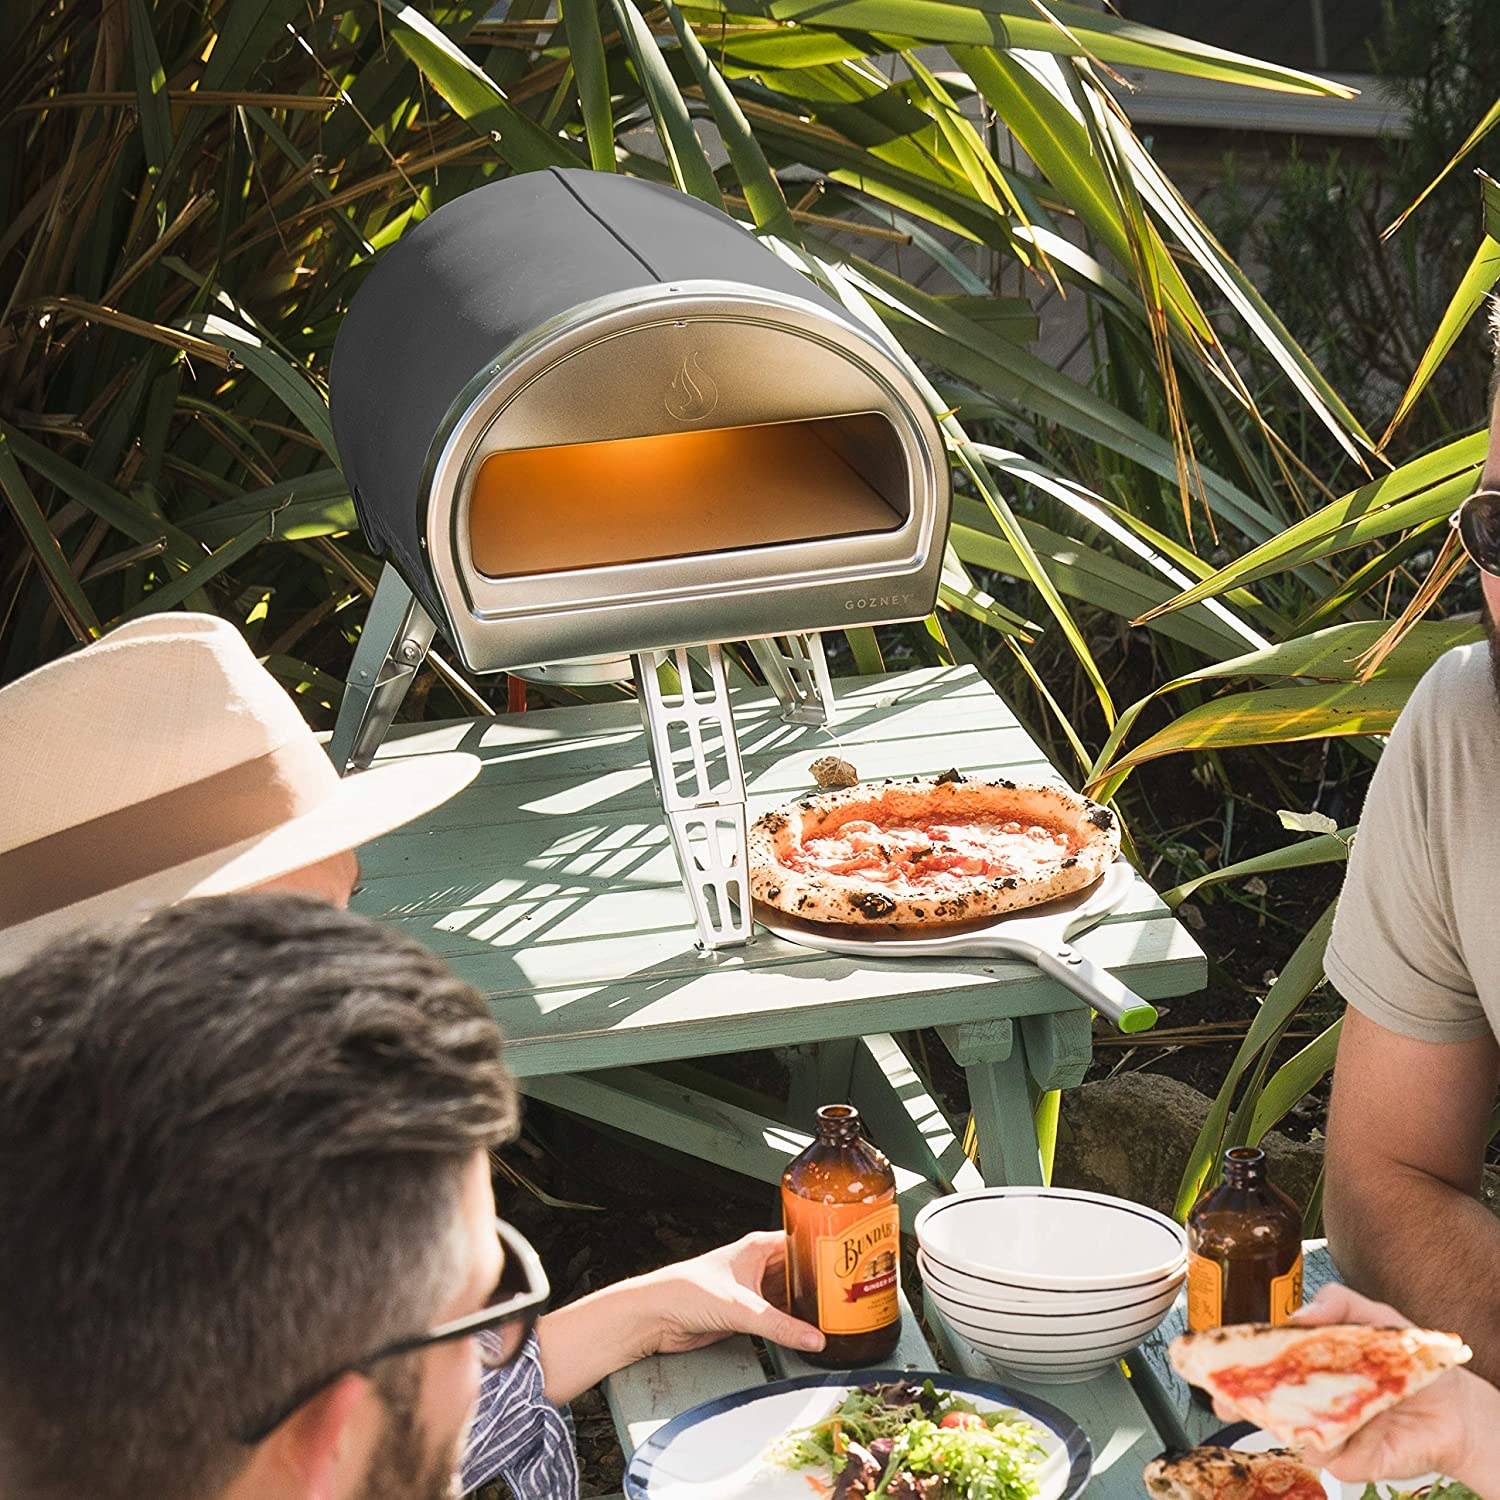 The pizza oven on a table outside